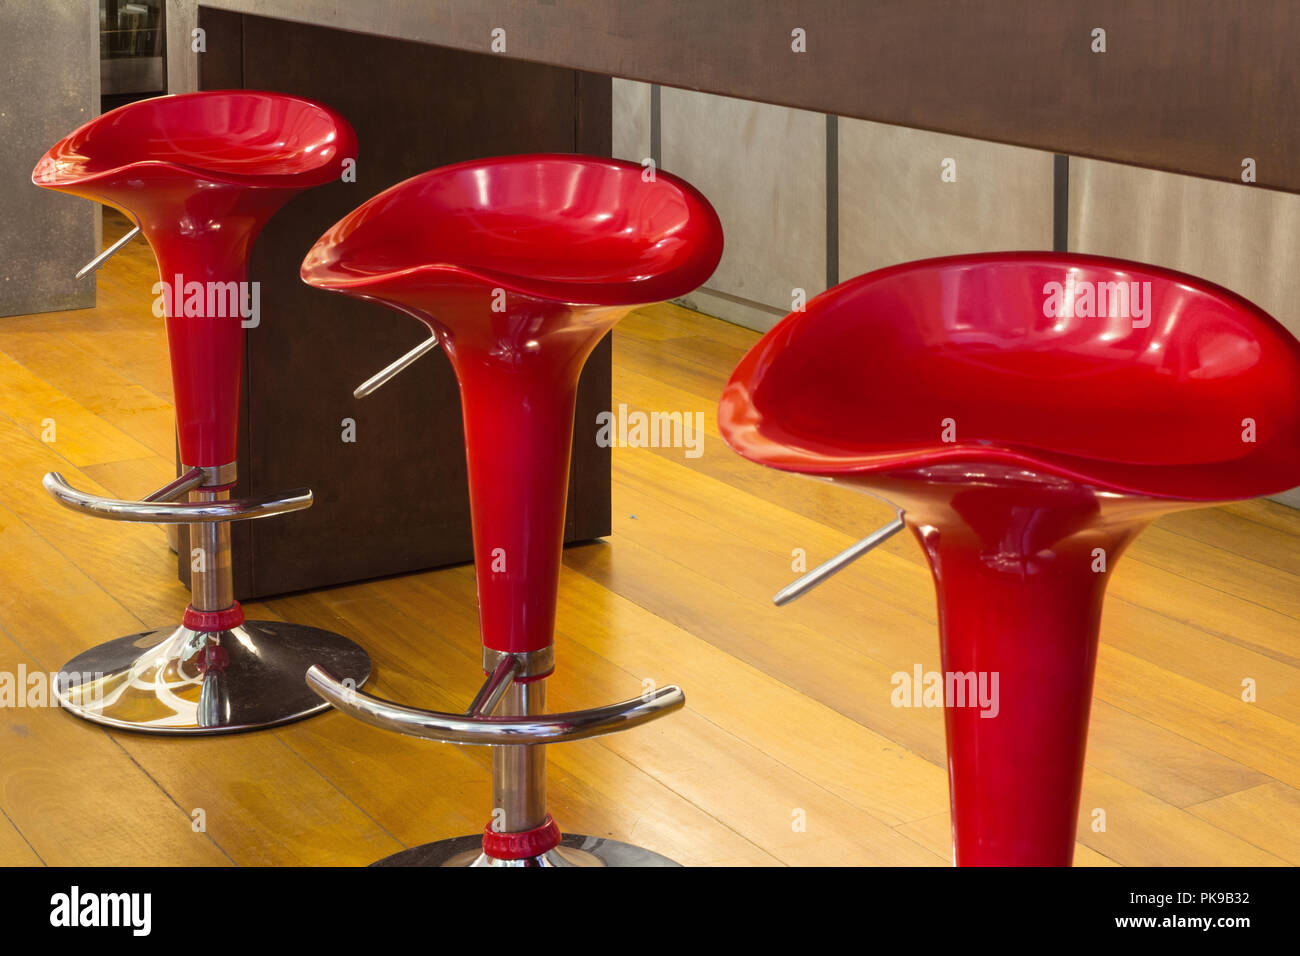 Interior of modern house, counter top with red stools, detail Stock Photo